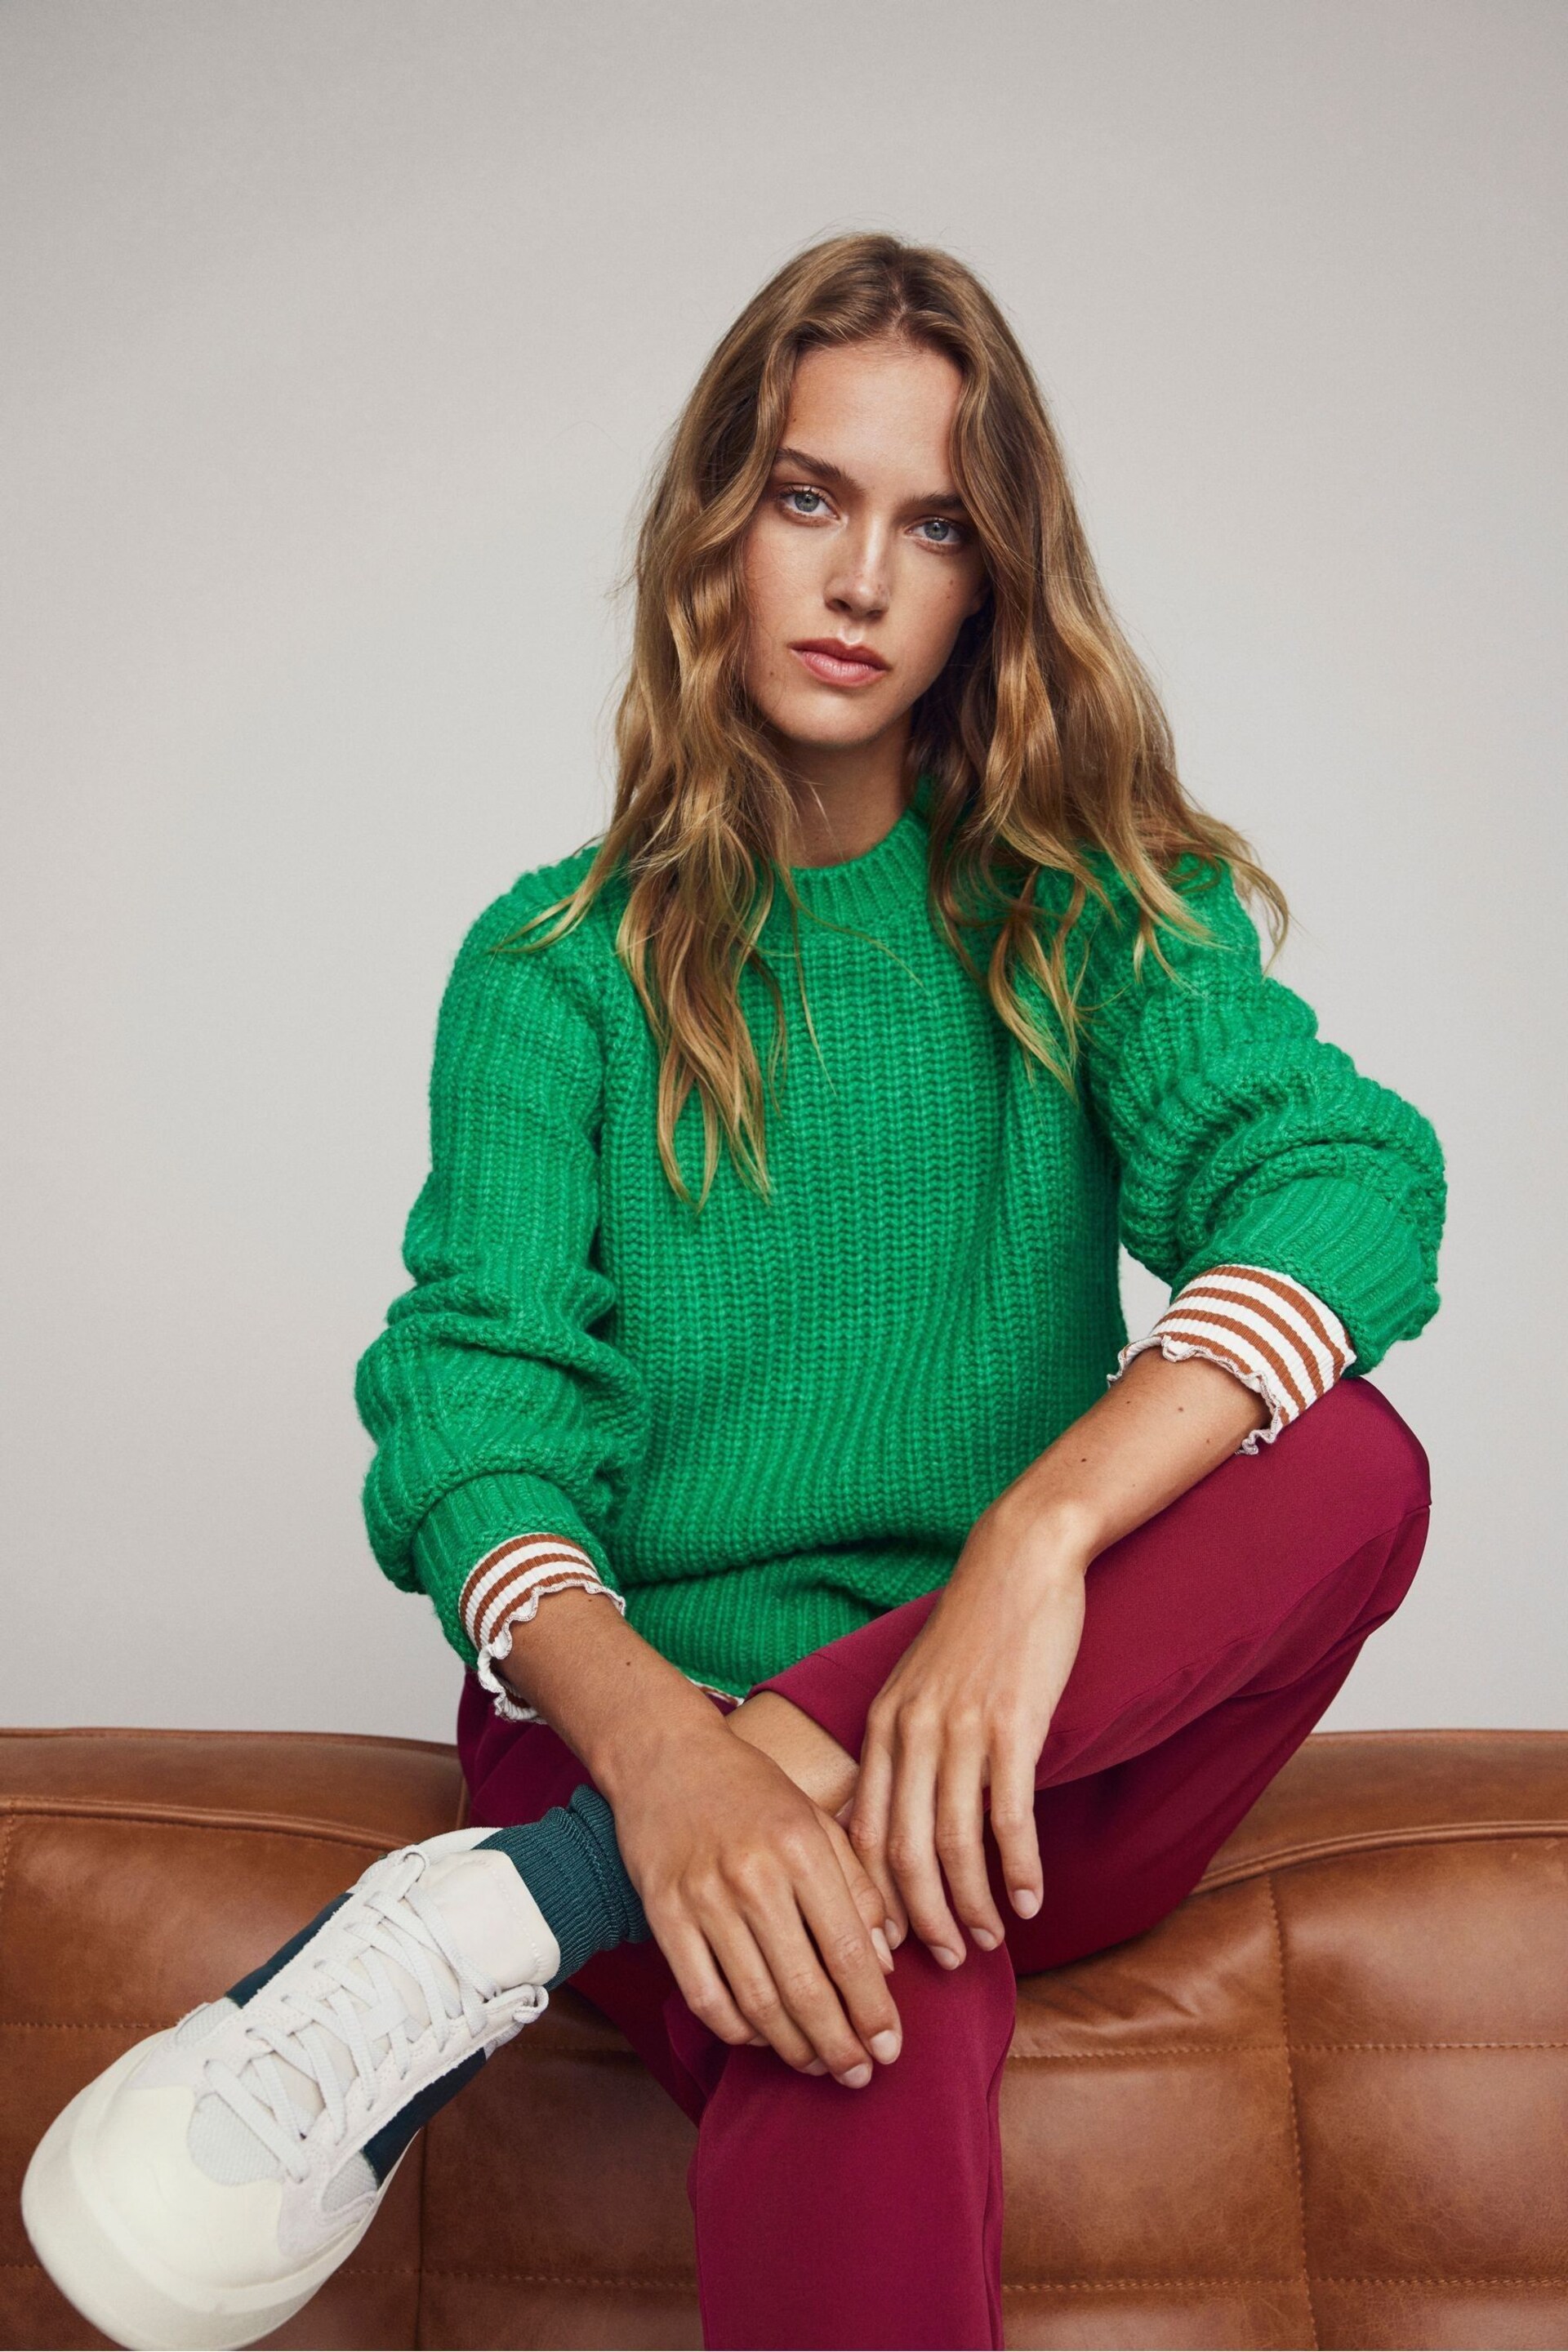 VILA Green Round Neck Cosy Knitted Jumper - Image 1 of 2